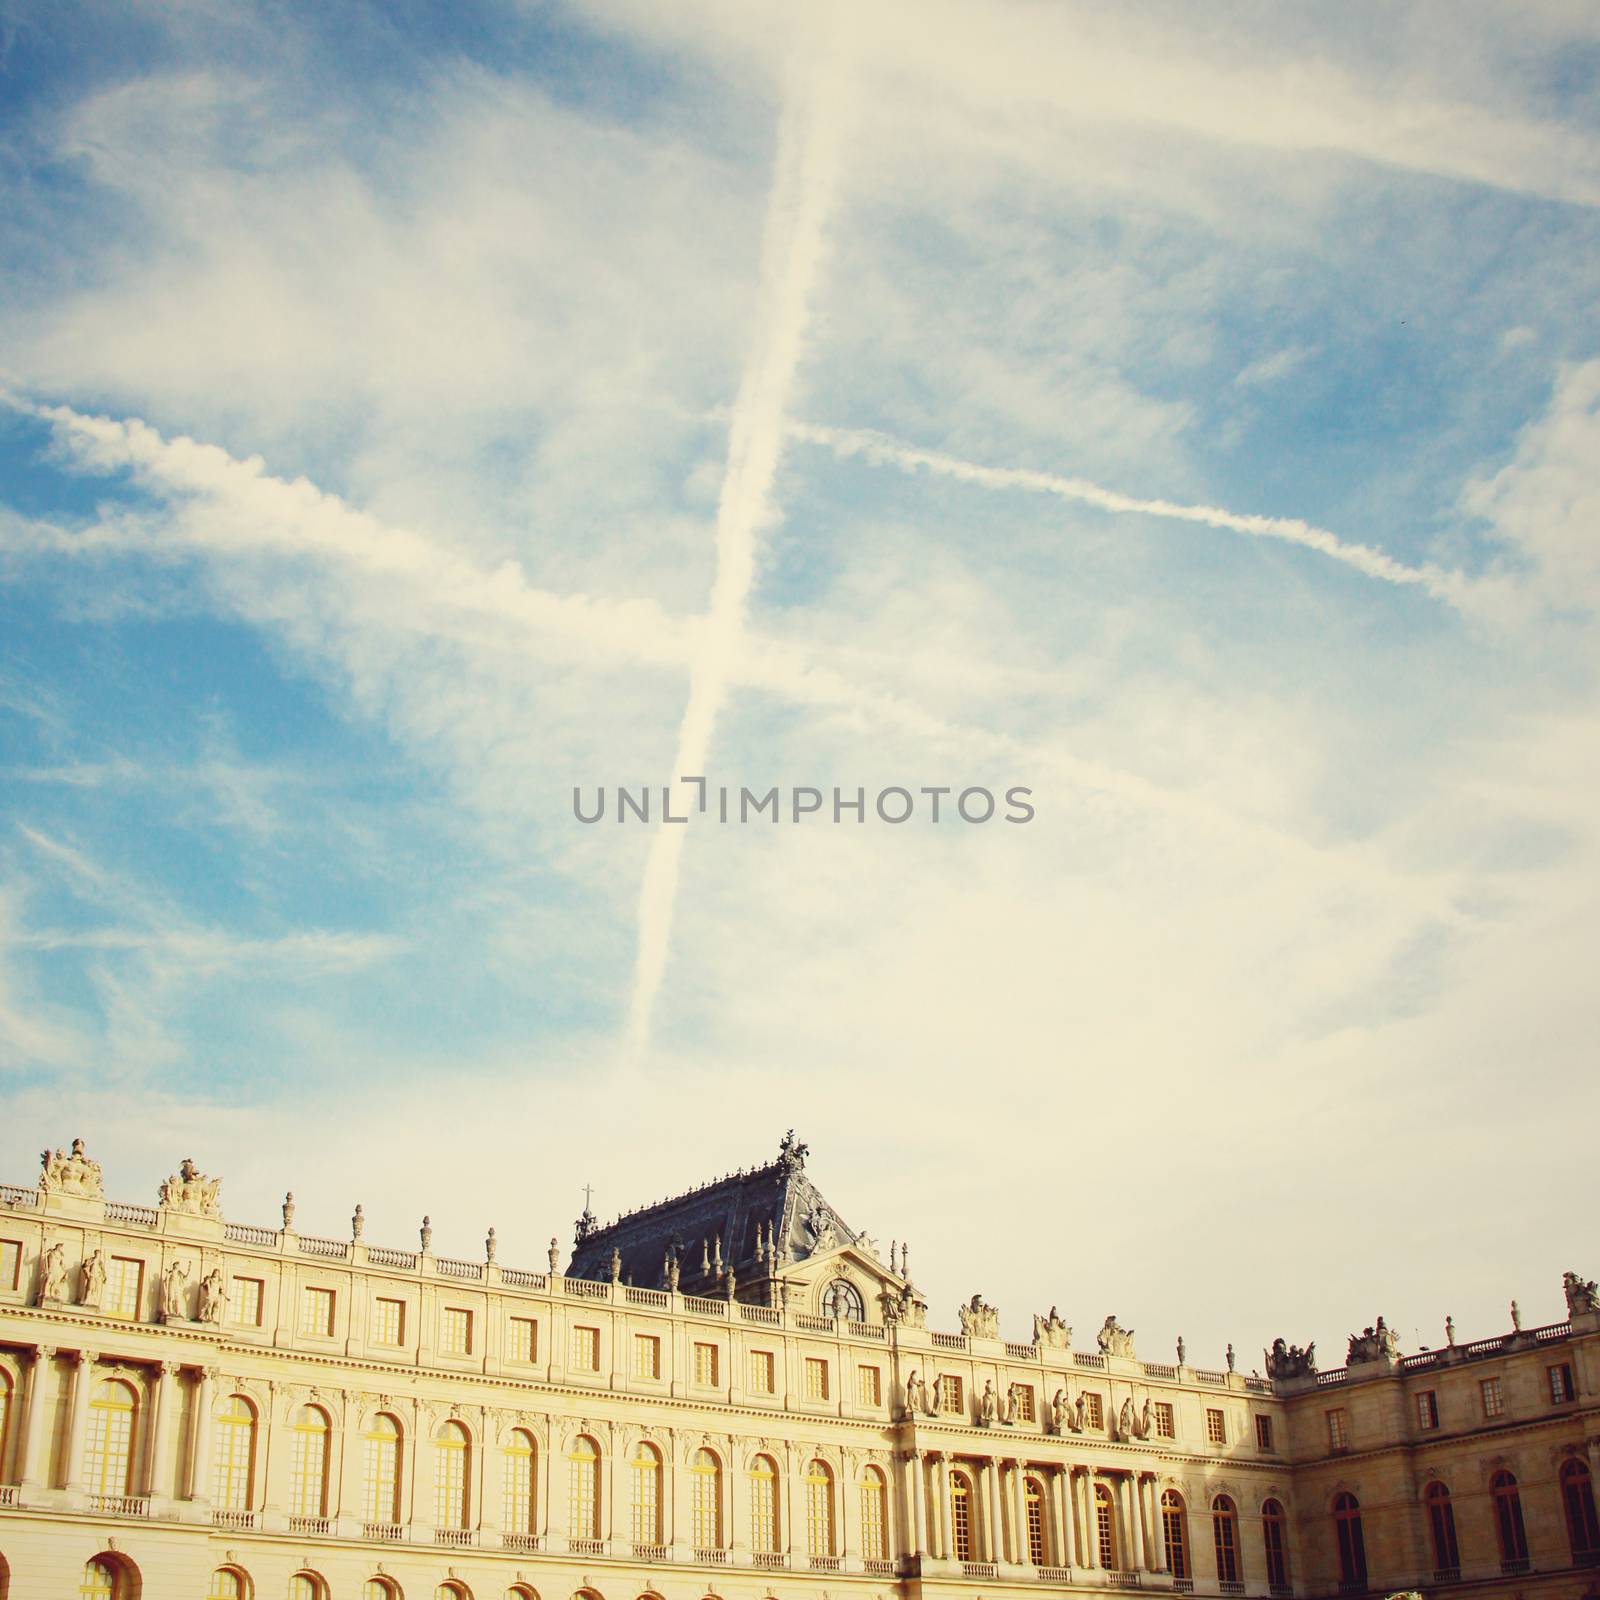 Chateau de Versailles and sky with Retro Filter Effect  by nuchylee